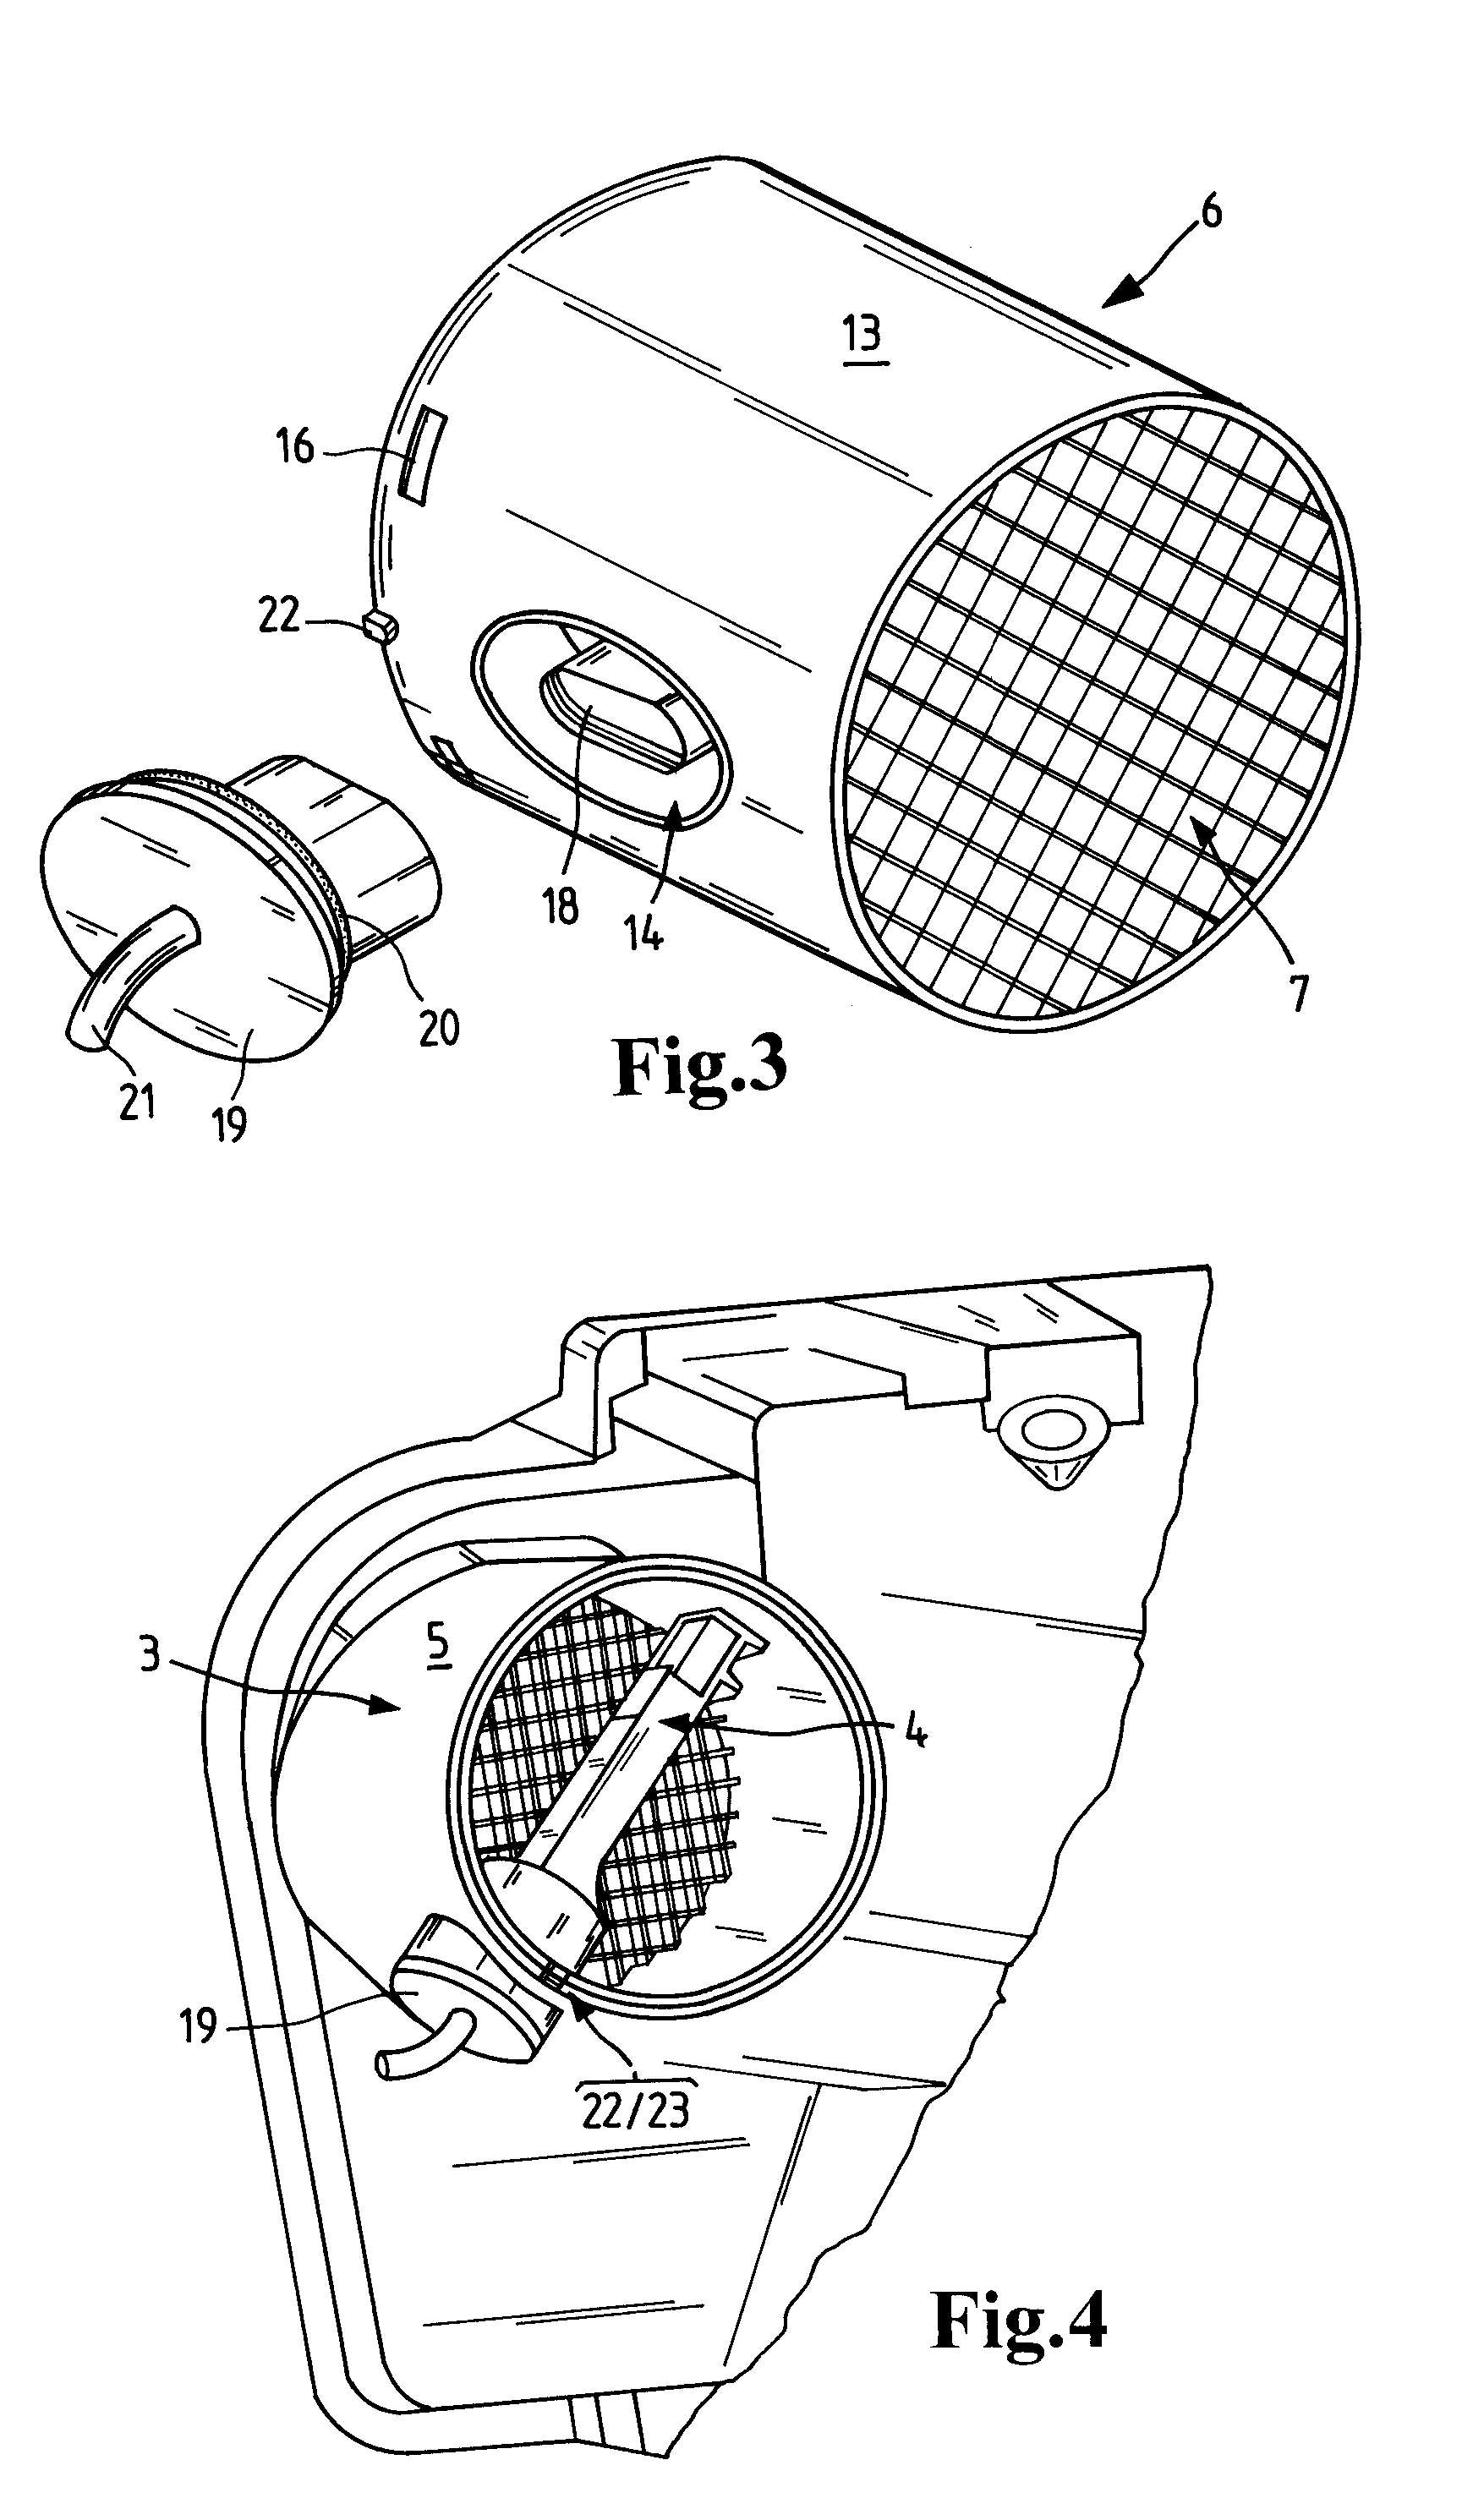 Air Filter System of a Motor Vehicle